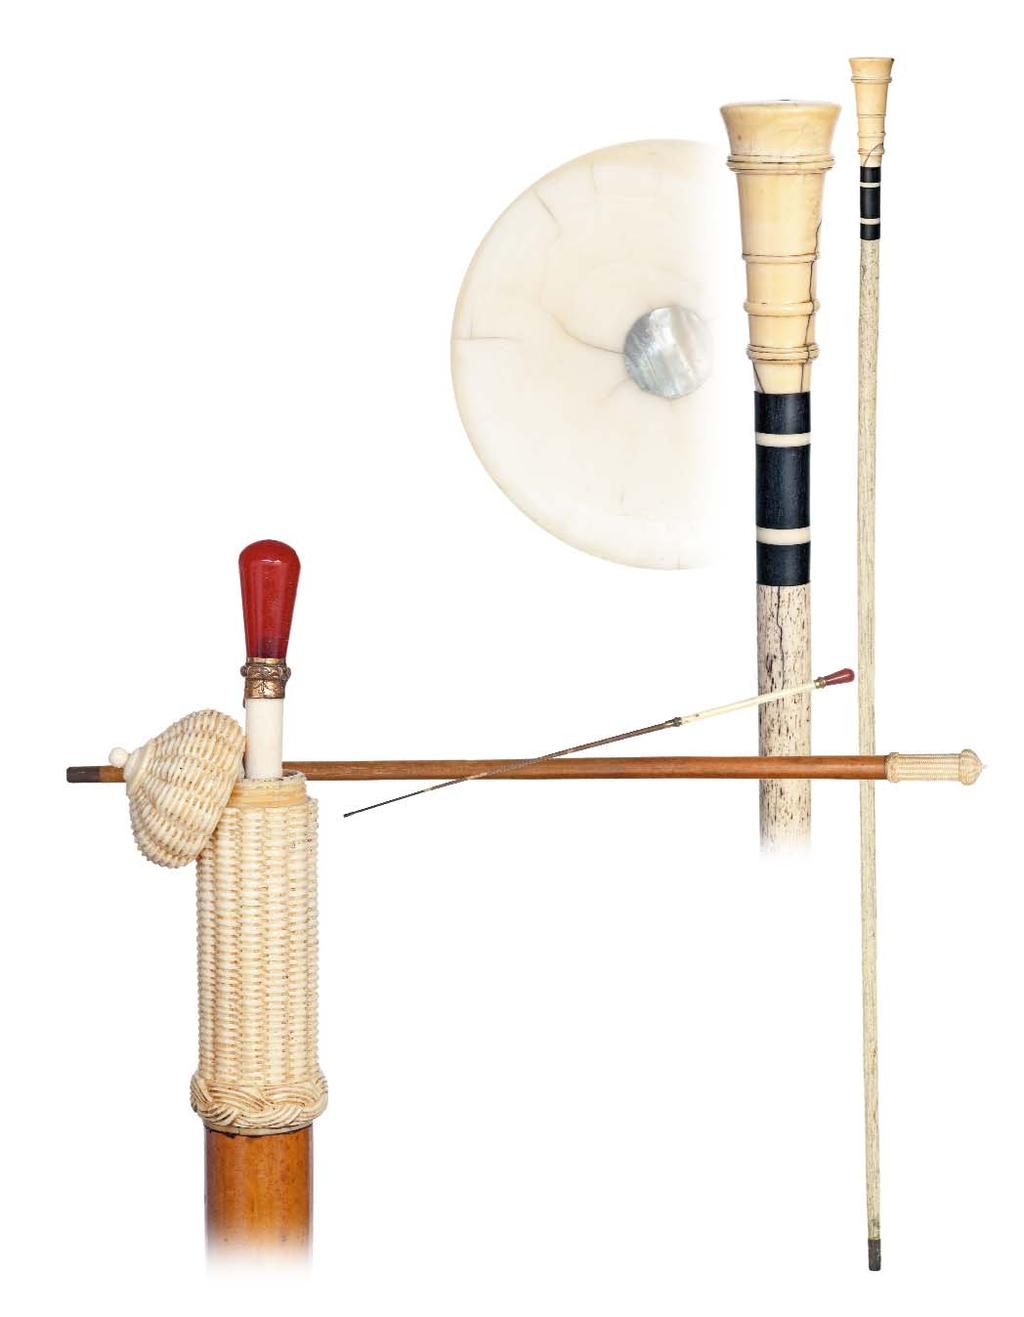 15. Whalebone Nautical Cane New England, circa 1865-A long and tapering sperm whales tooth ivory handle turned with multiple rings and set at the top with an abalone shield on a whale bone shaft with